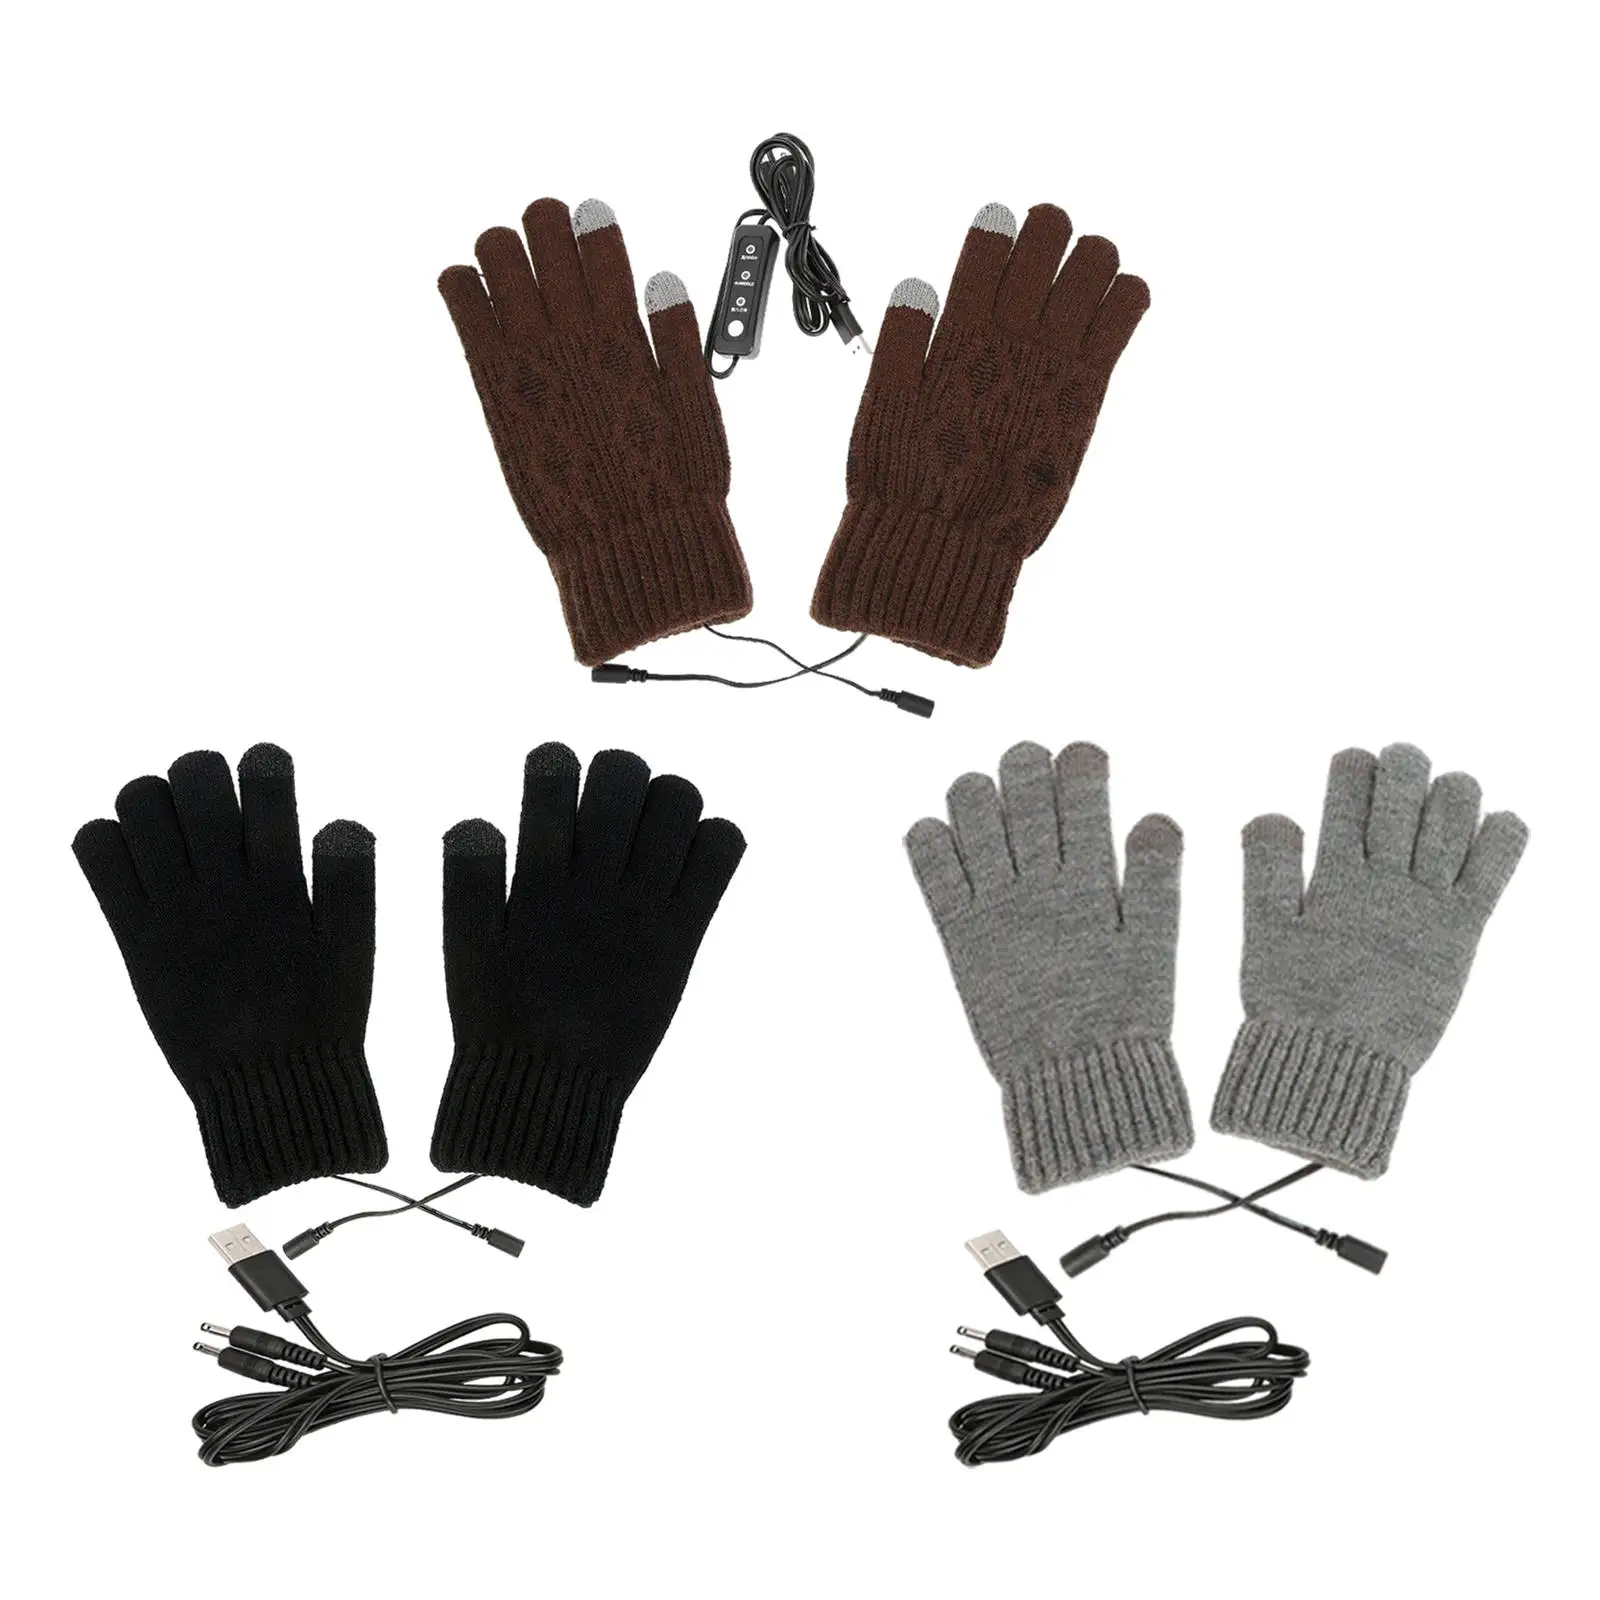 Winter Electric Heating Gloves Thermal USB Heated Gloves Electric Heating Glove Heated Gloves